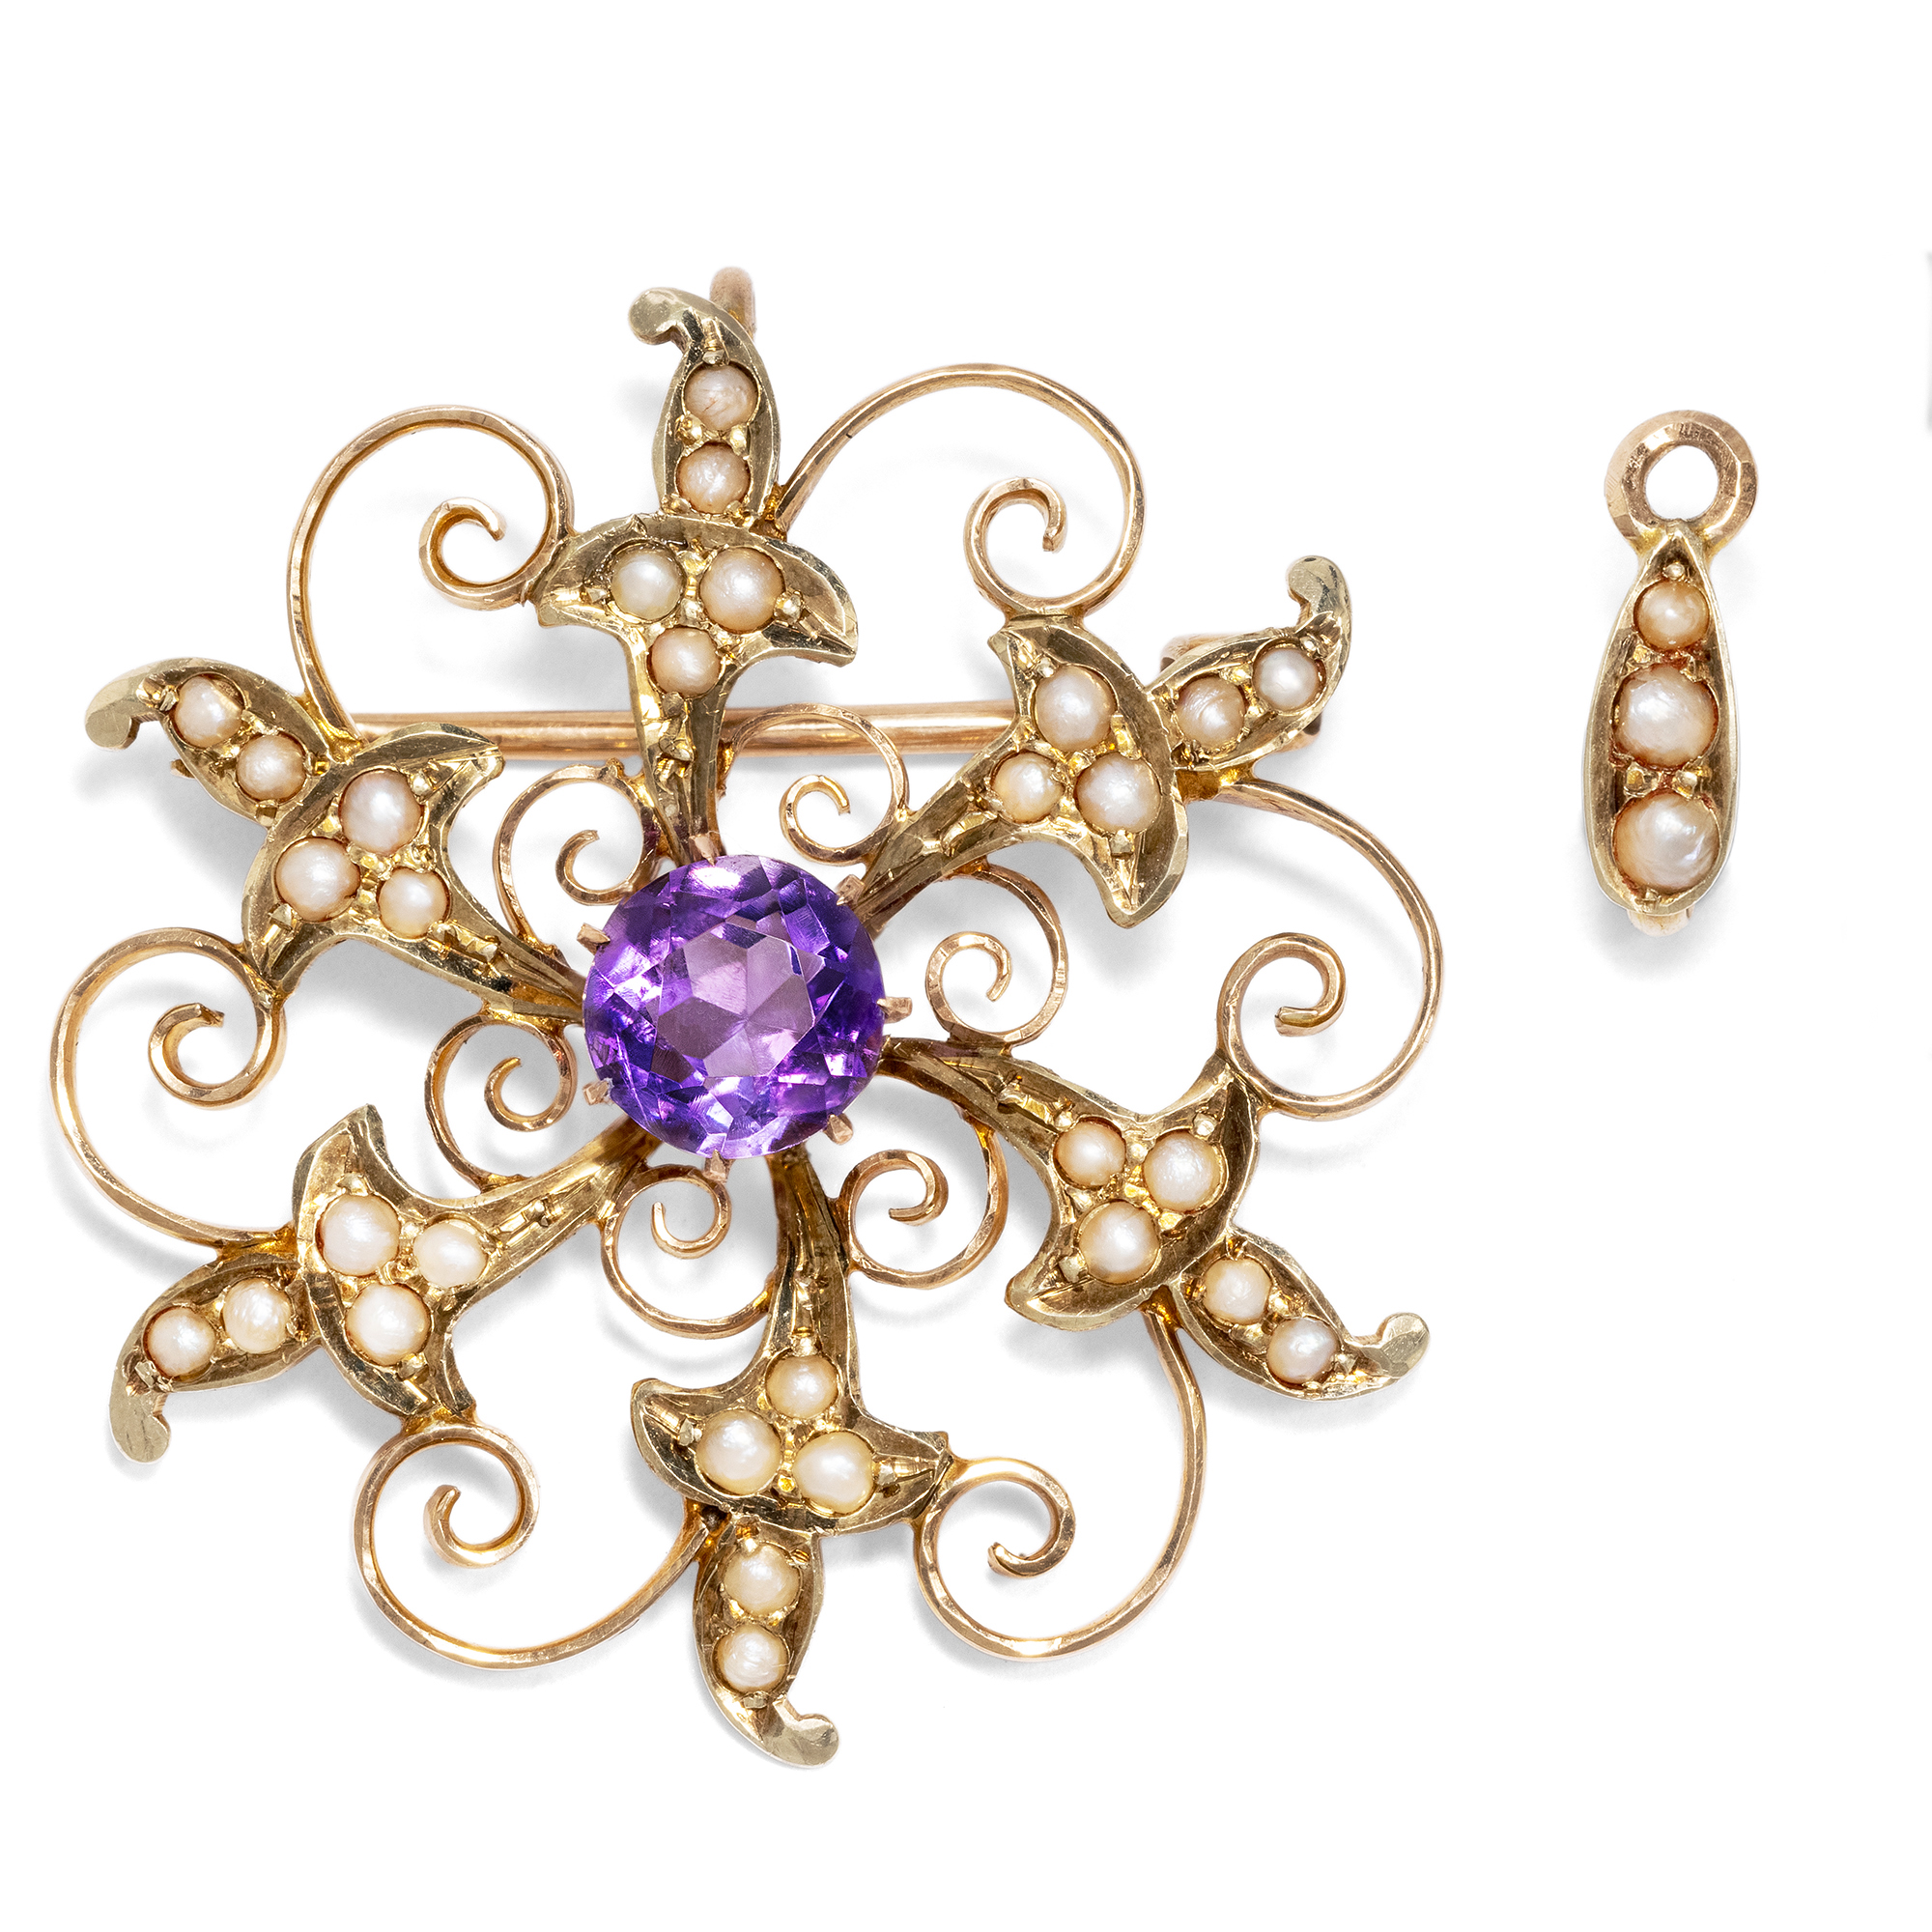 Delicate Pendant/Brooch with Amethyst & Pearls in Gold, Great Britain c. 1895